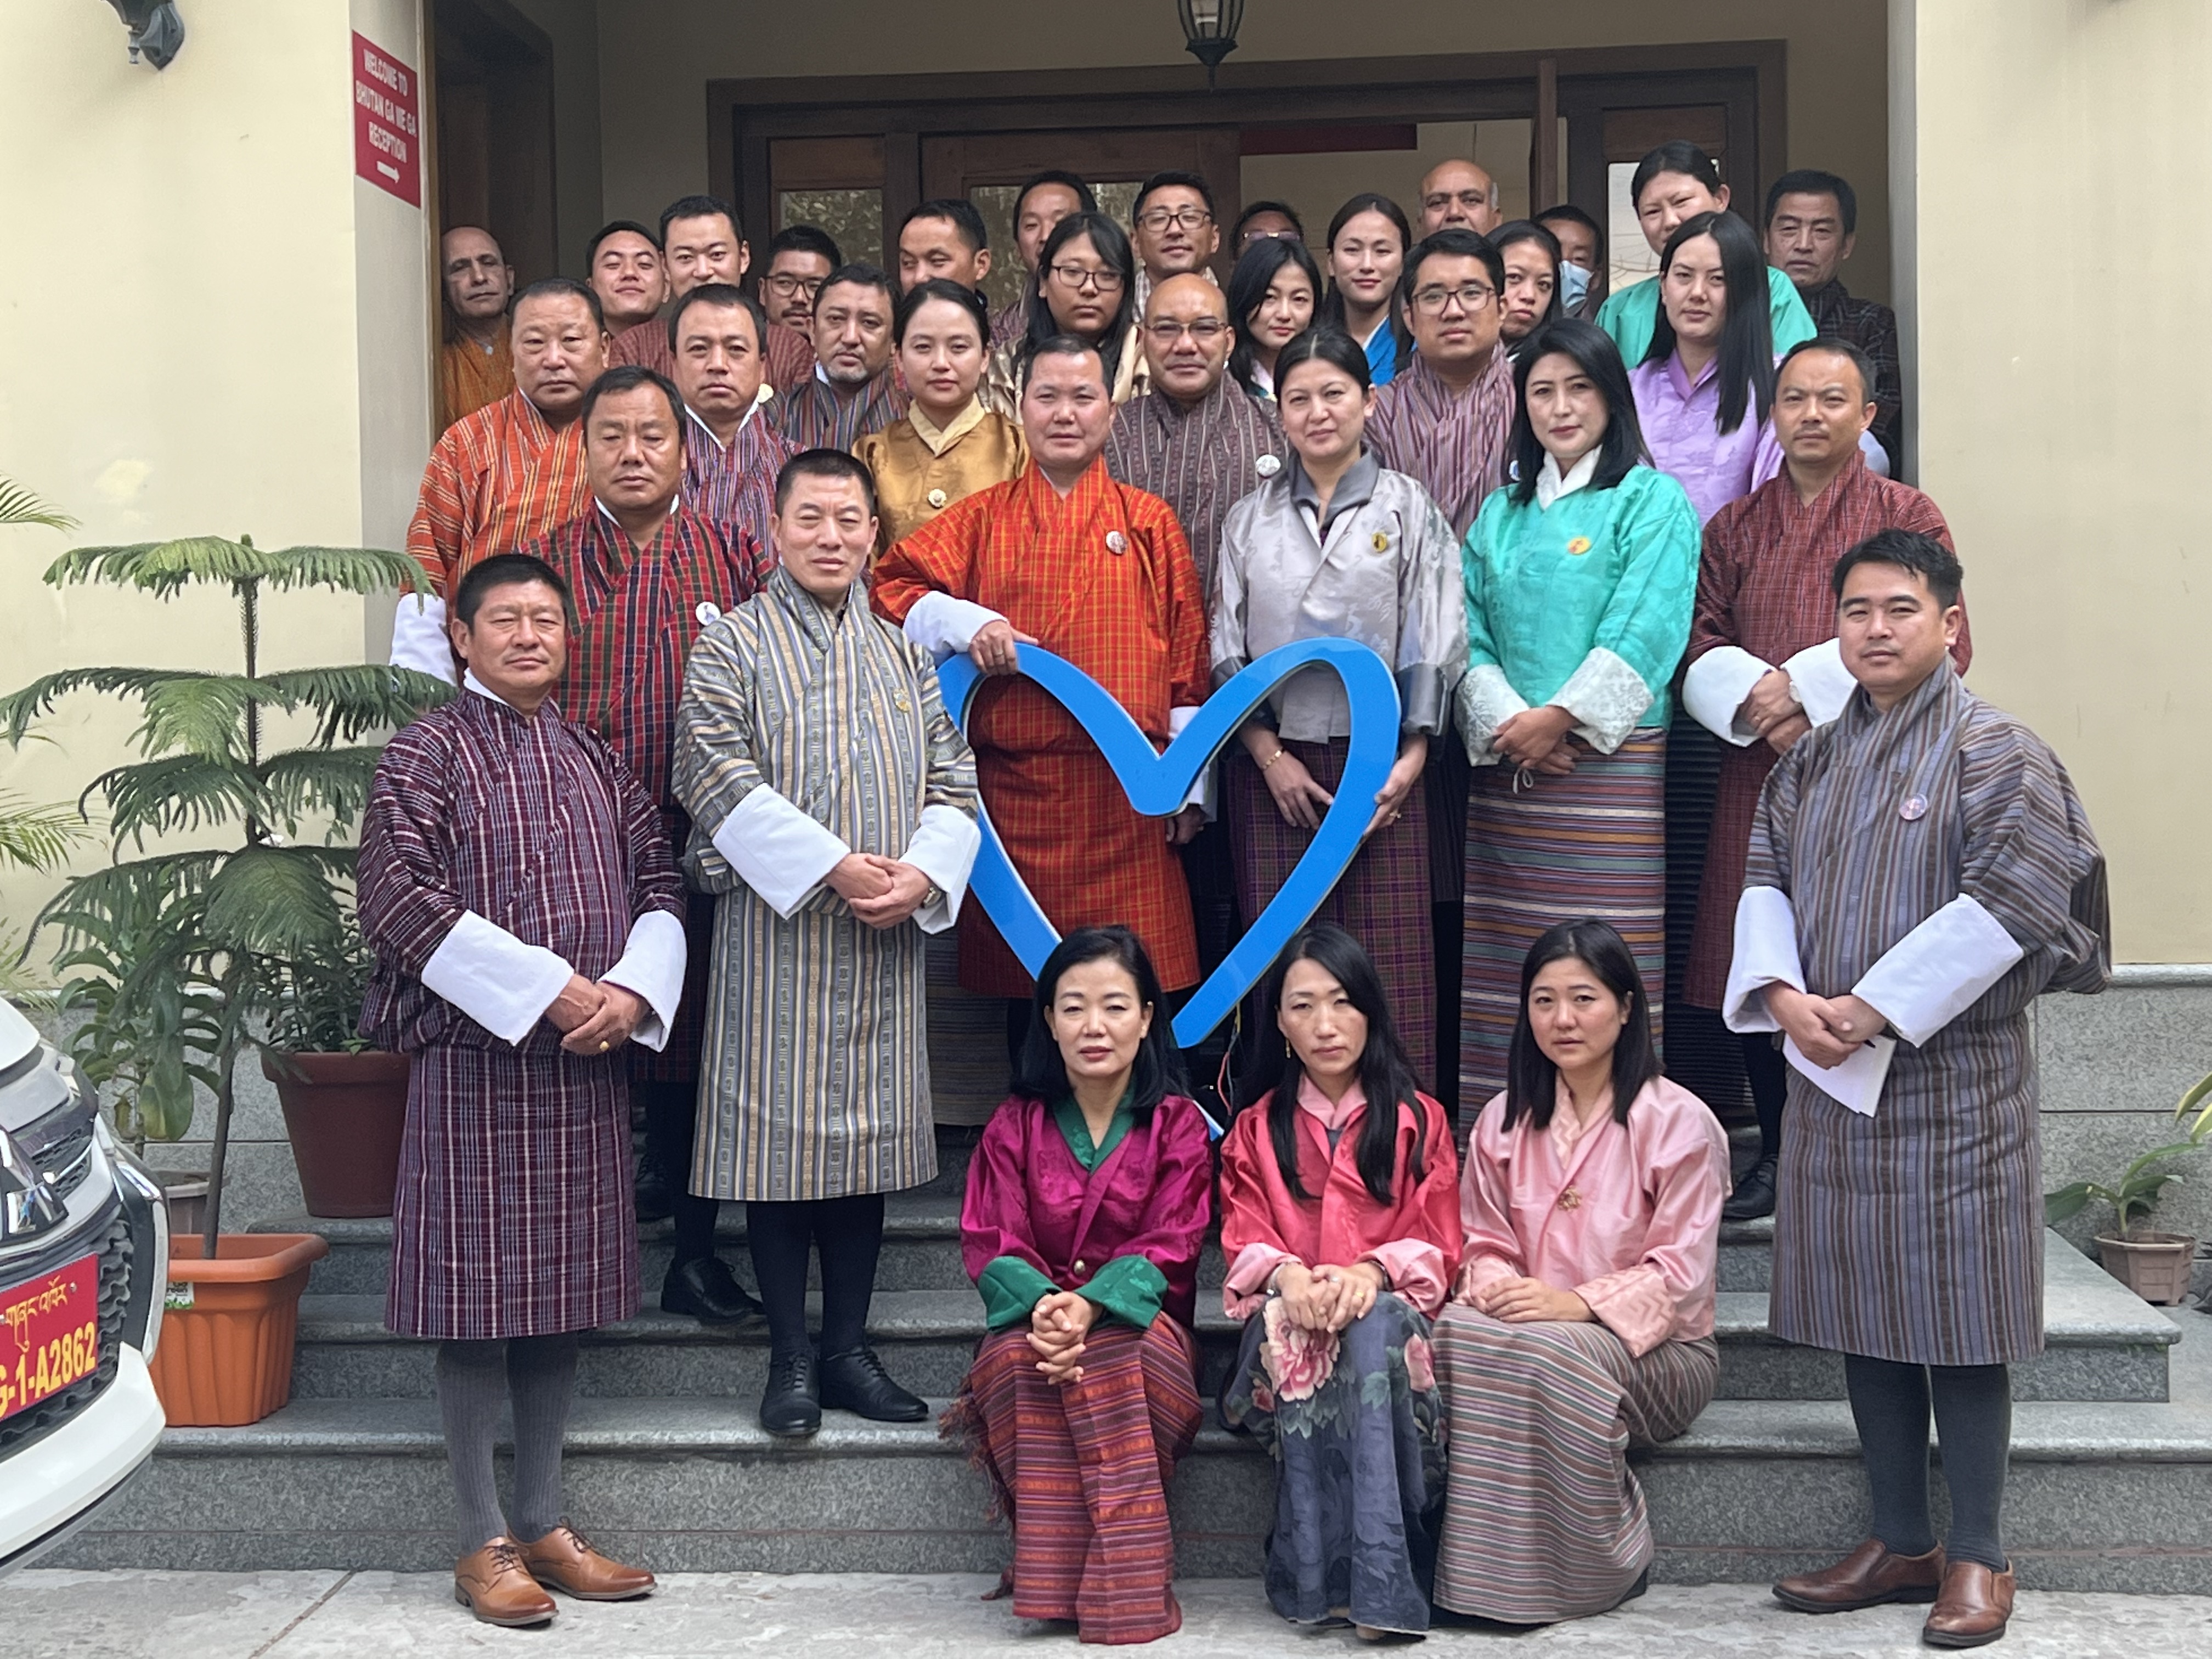 Group photo taken outside a building. A man in the group is holding a heart-shaped symbol. 